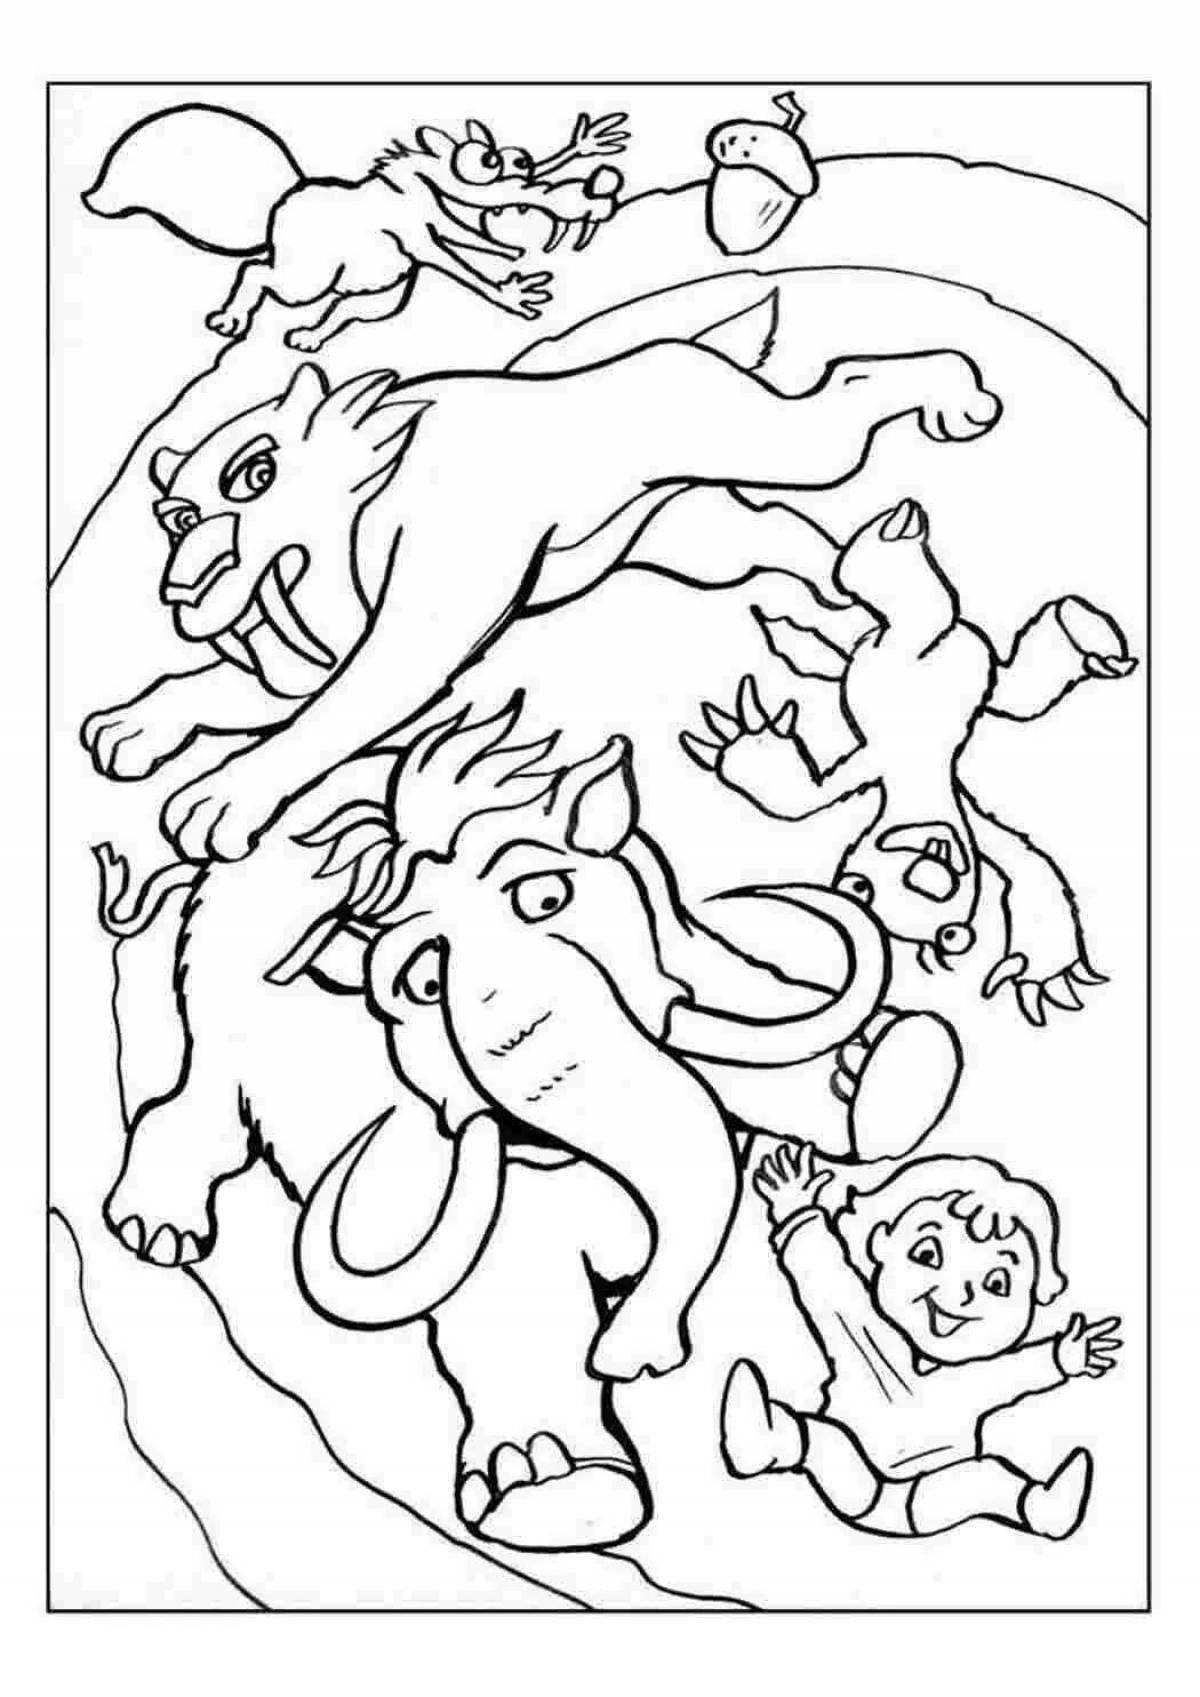 Manny's funny ice age coloring book